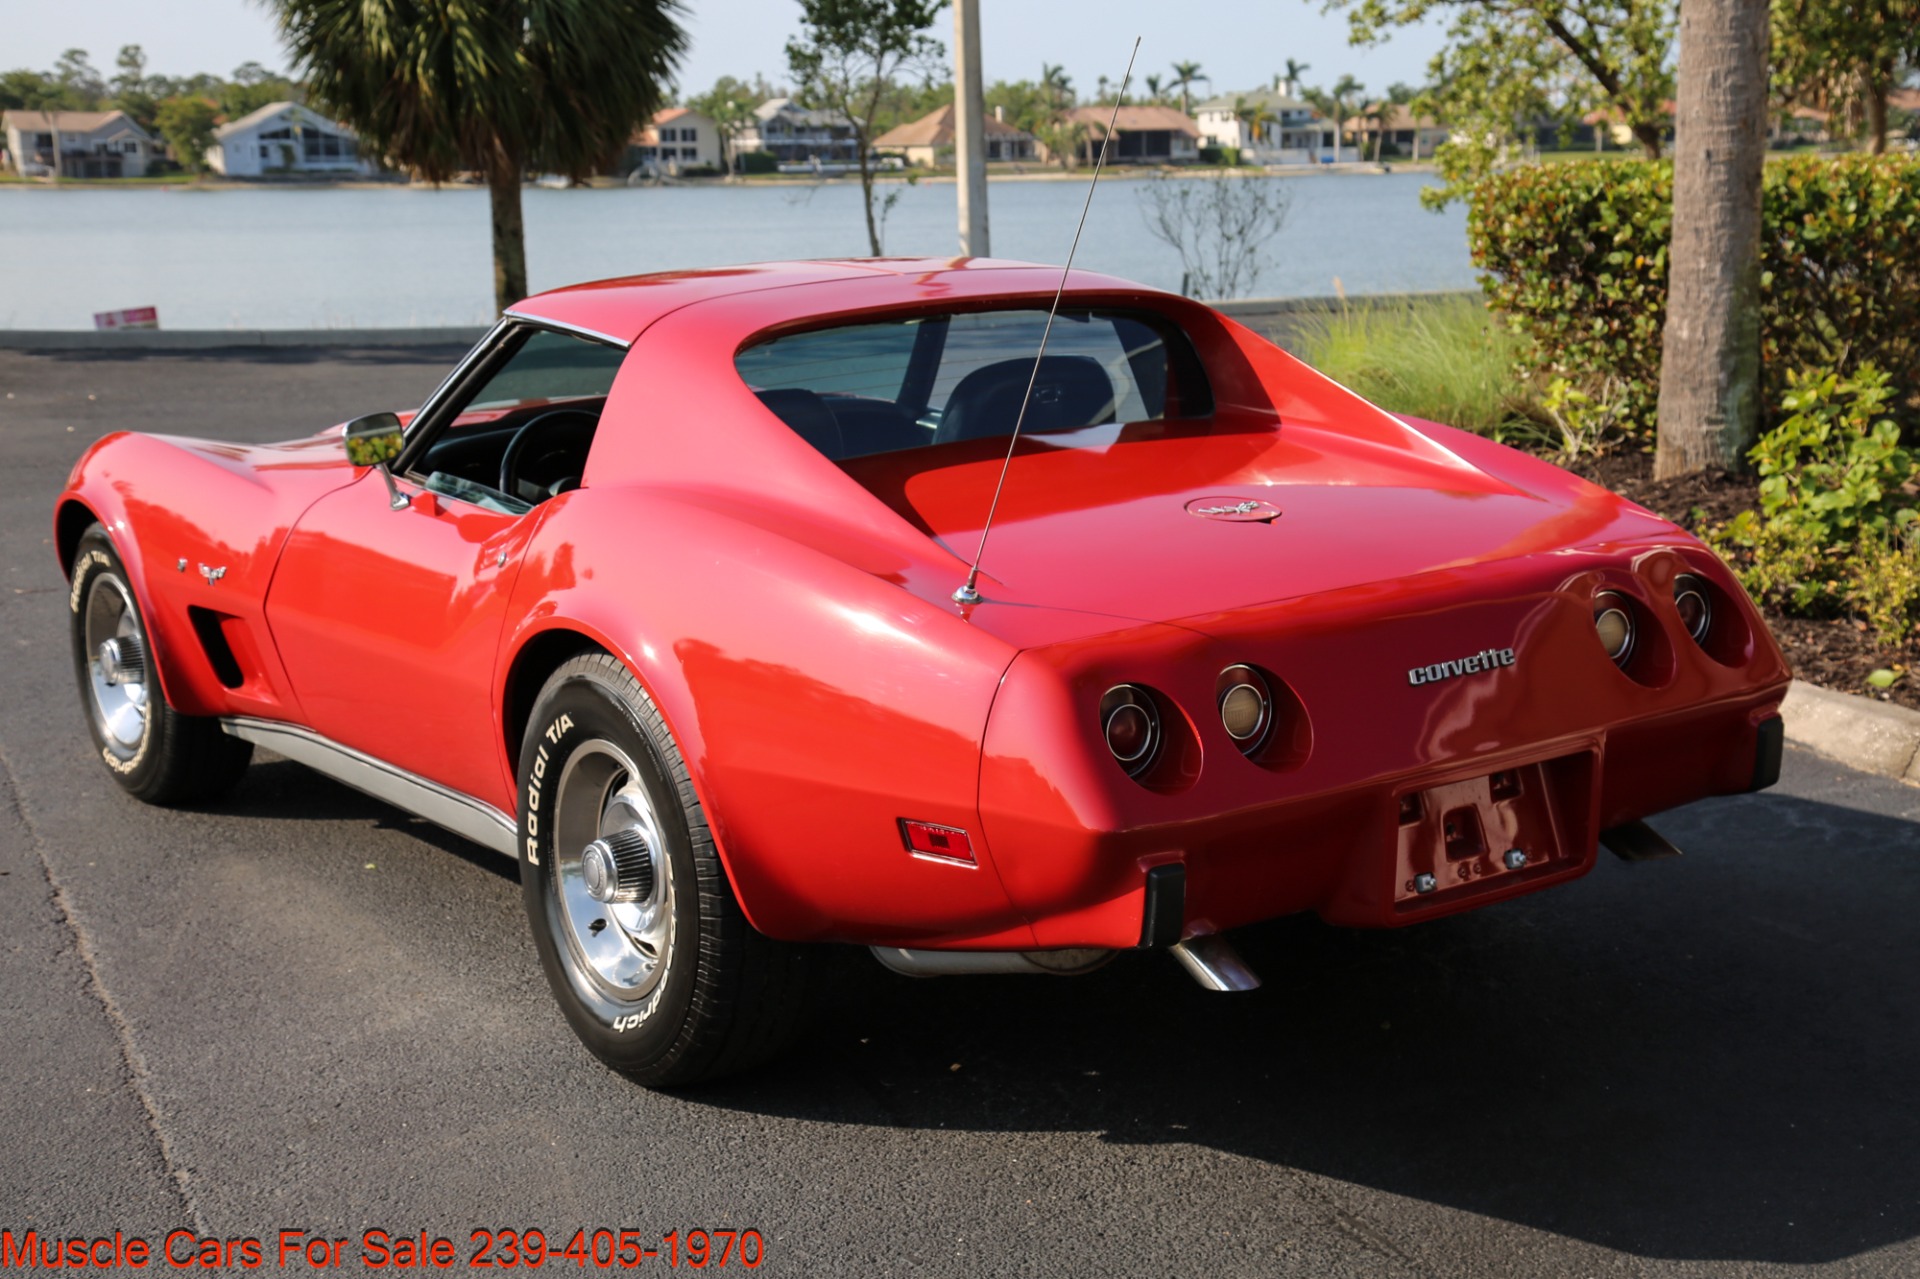 Used 1977 Chevrolet Corvette V8 Auto for sale $16,500 at Muscle Cars for Sale Inc. in Fort Myers FL 33912 5